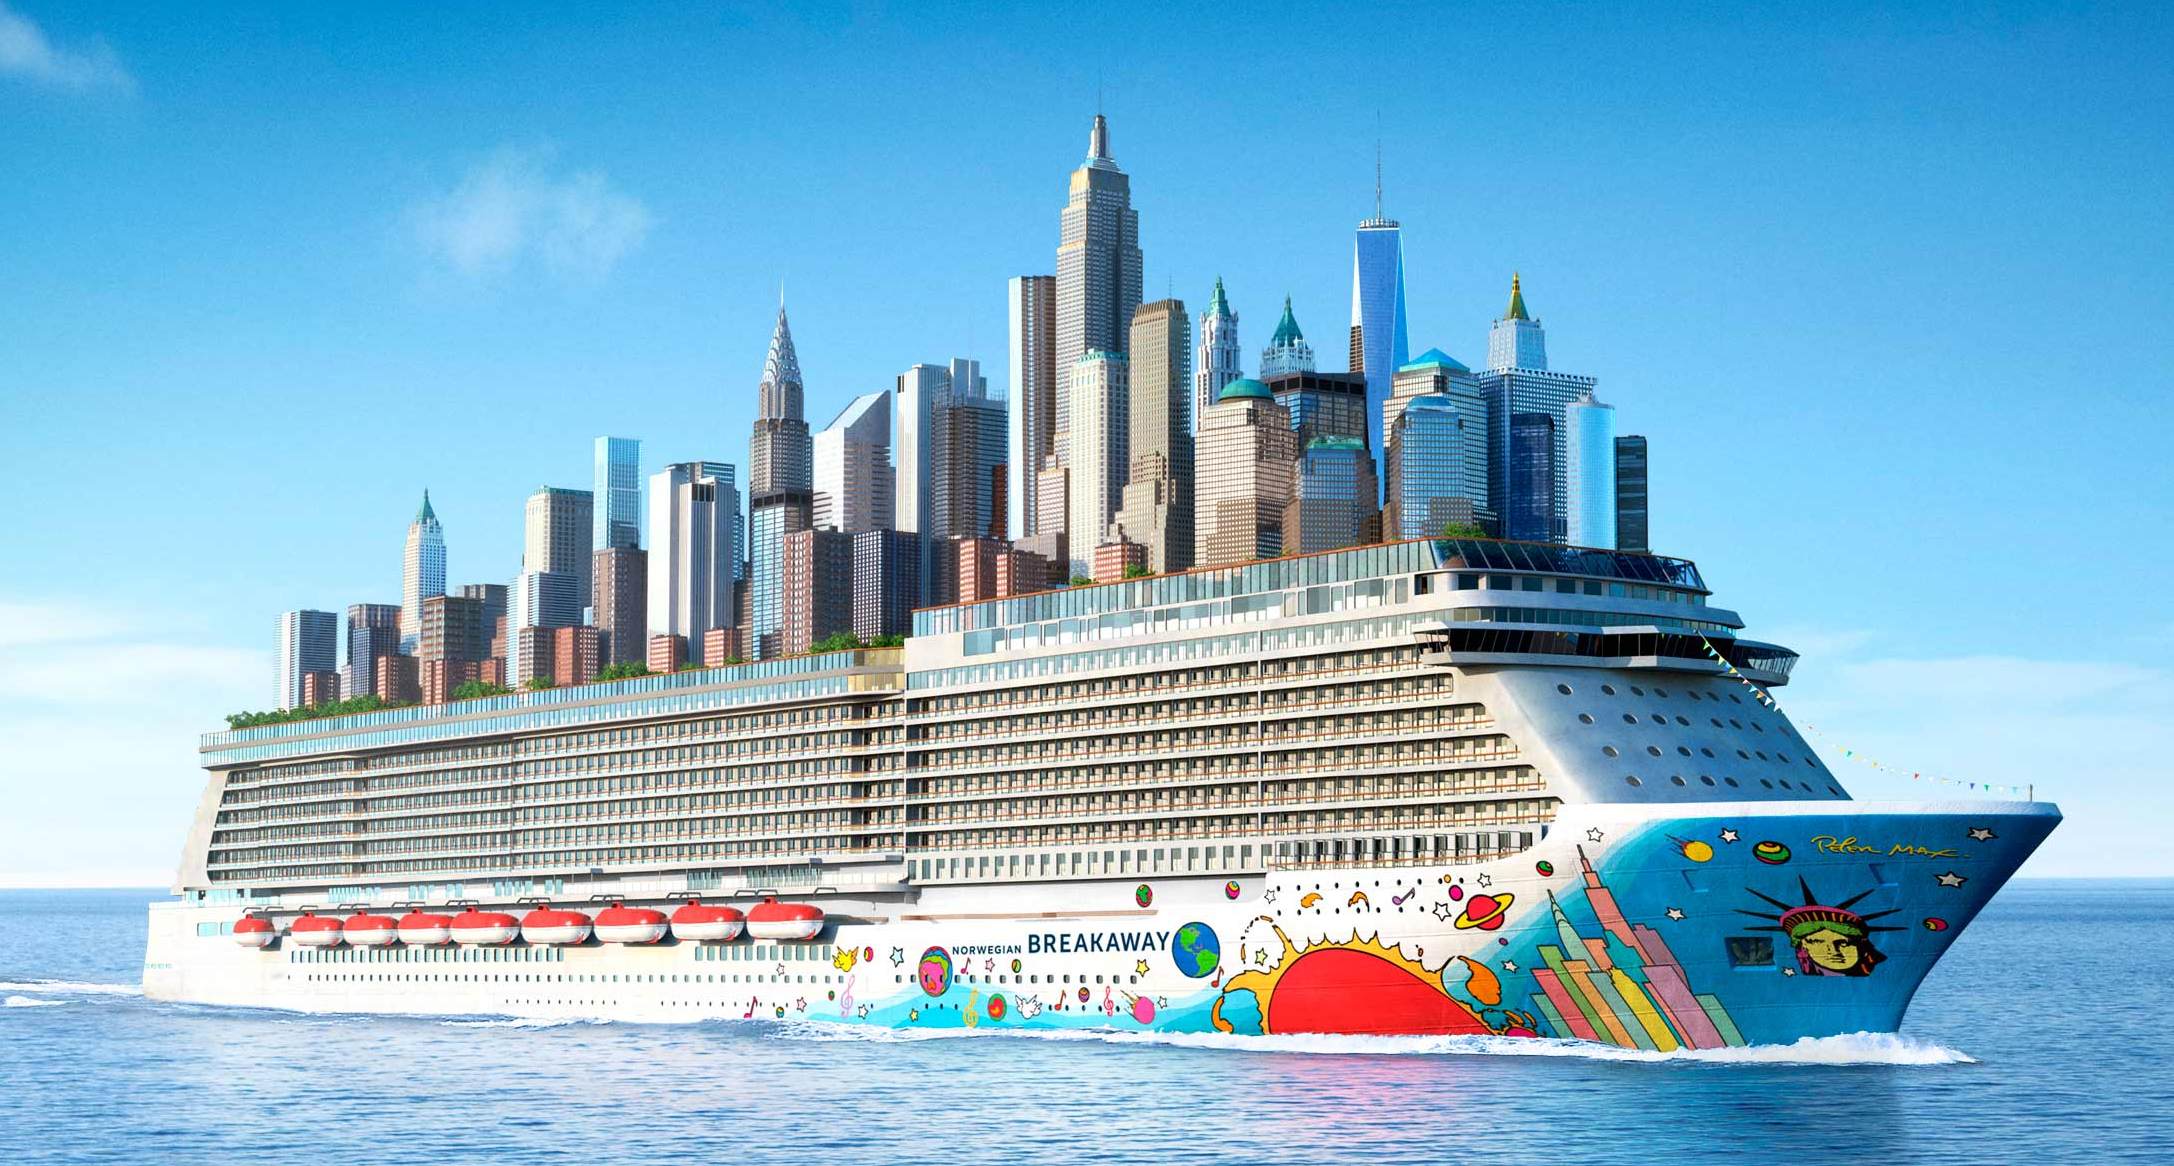 New York City Inspired Advertising Campaign Promotes New Yorks Ship